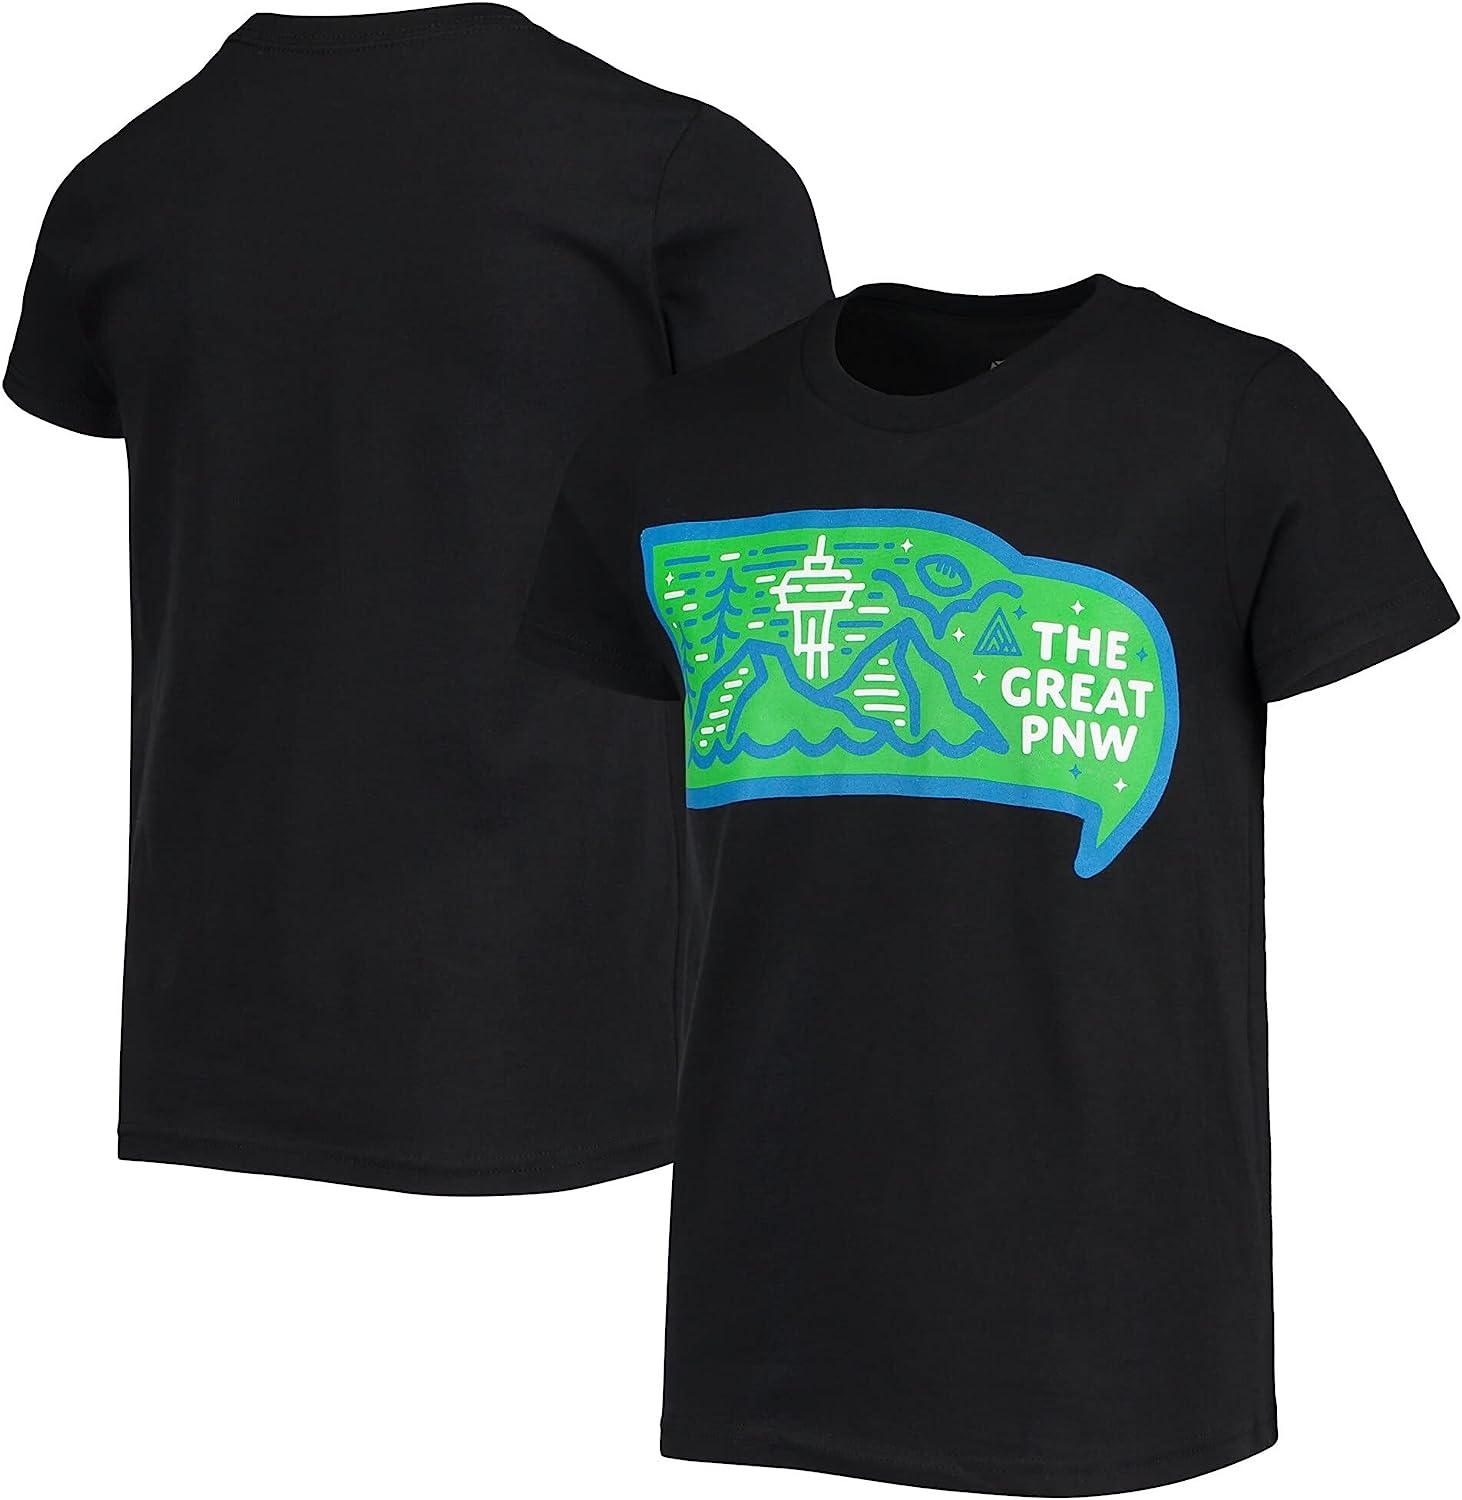 THE GREAT PNW Youth Black Seattle Seahawks United T-Shirt   price checker   price checker Description Gallery Reviews